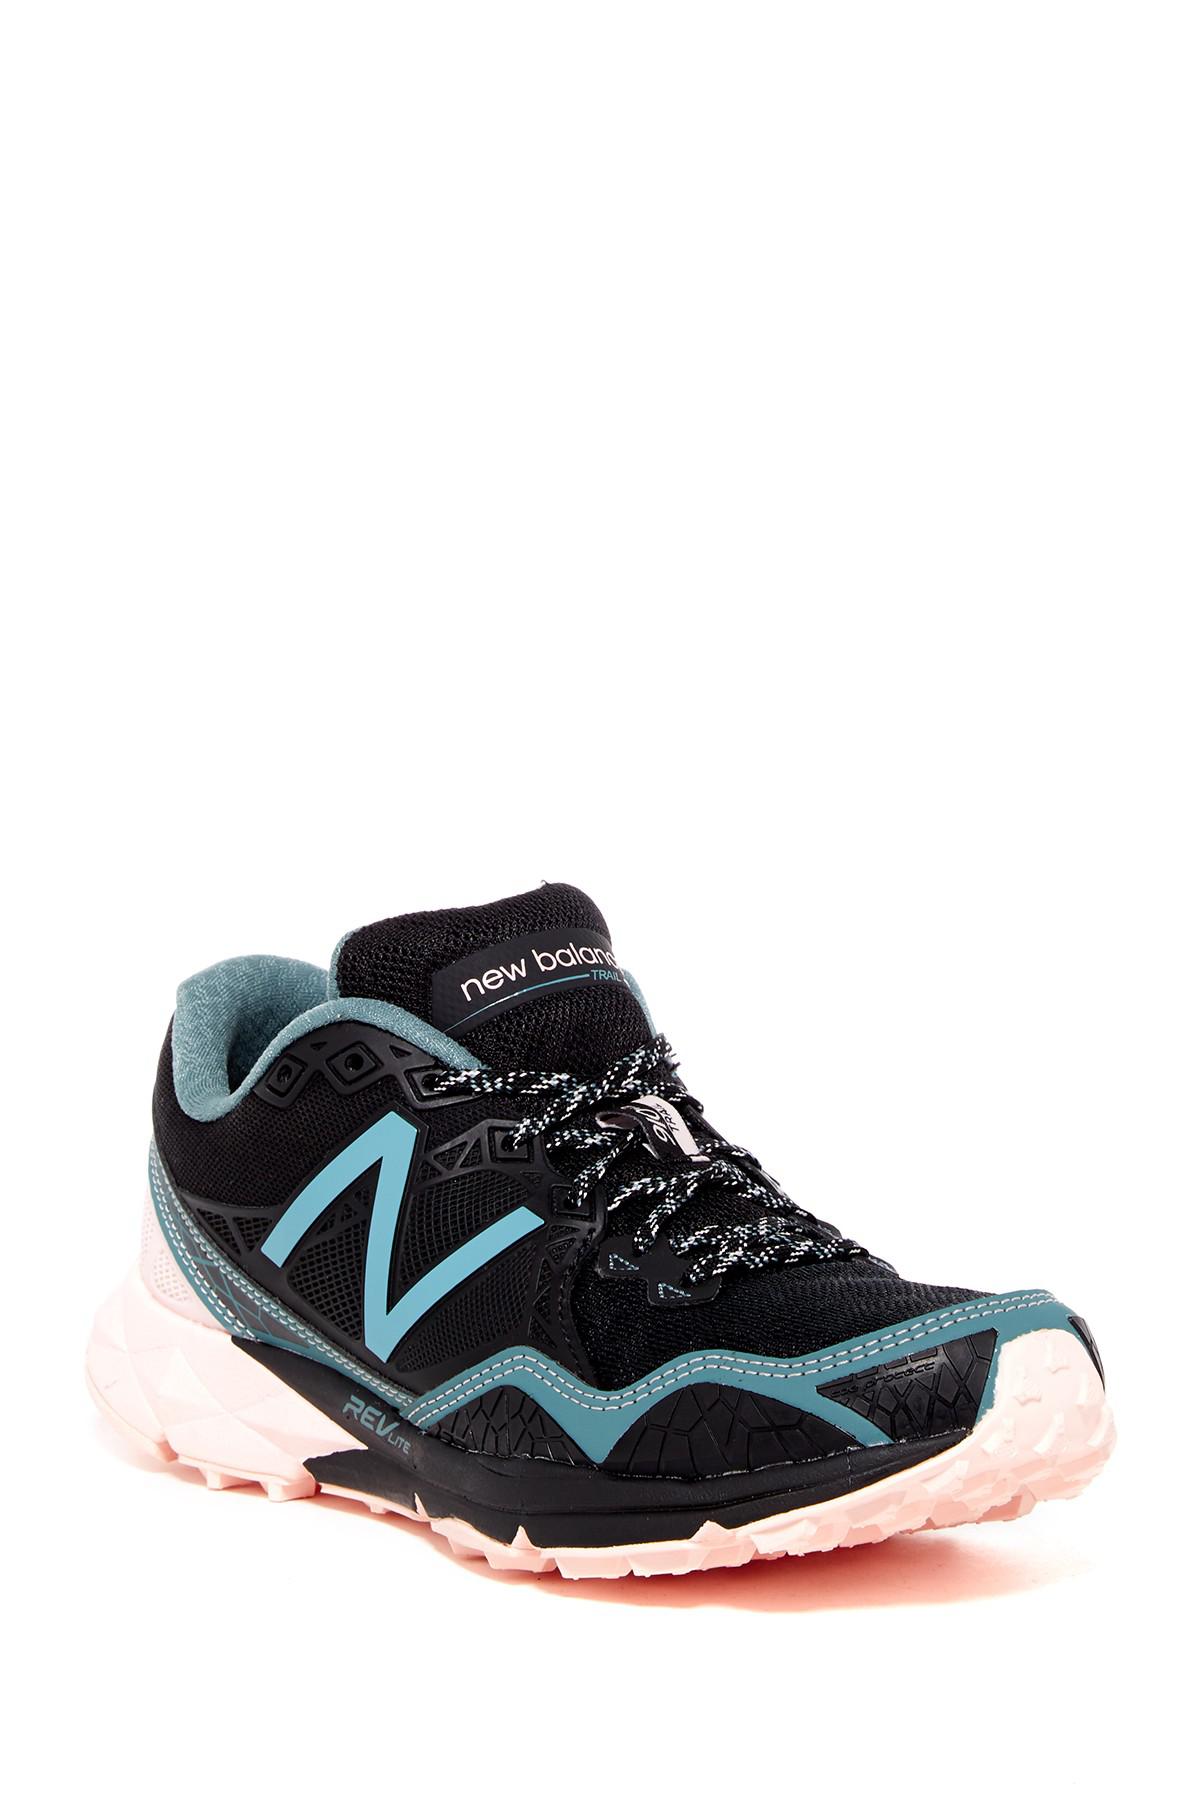 New Balance 910 V3 Trail Running Sneaker - Wide Width Available in ...